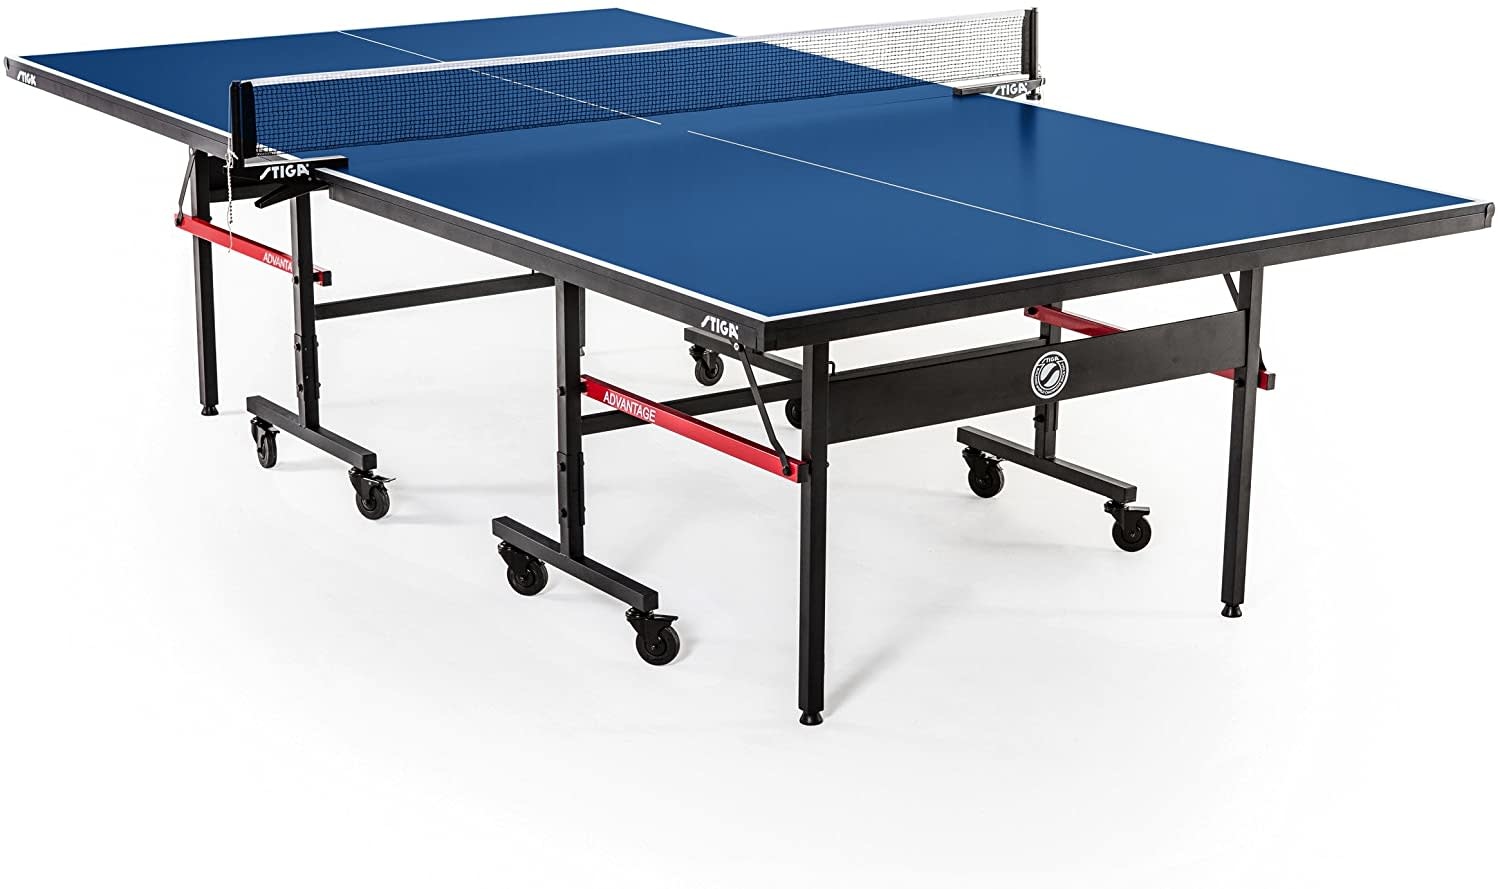 Advantage Indoor Ping Pong Table